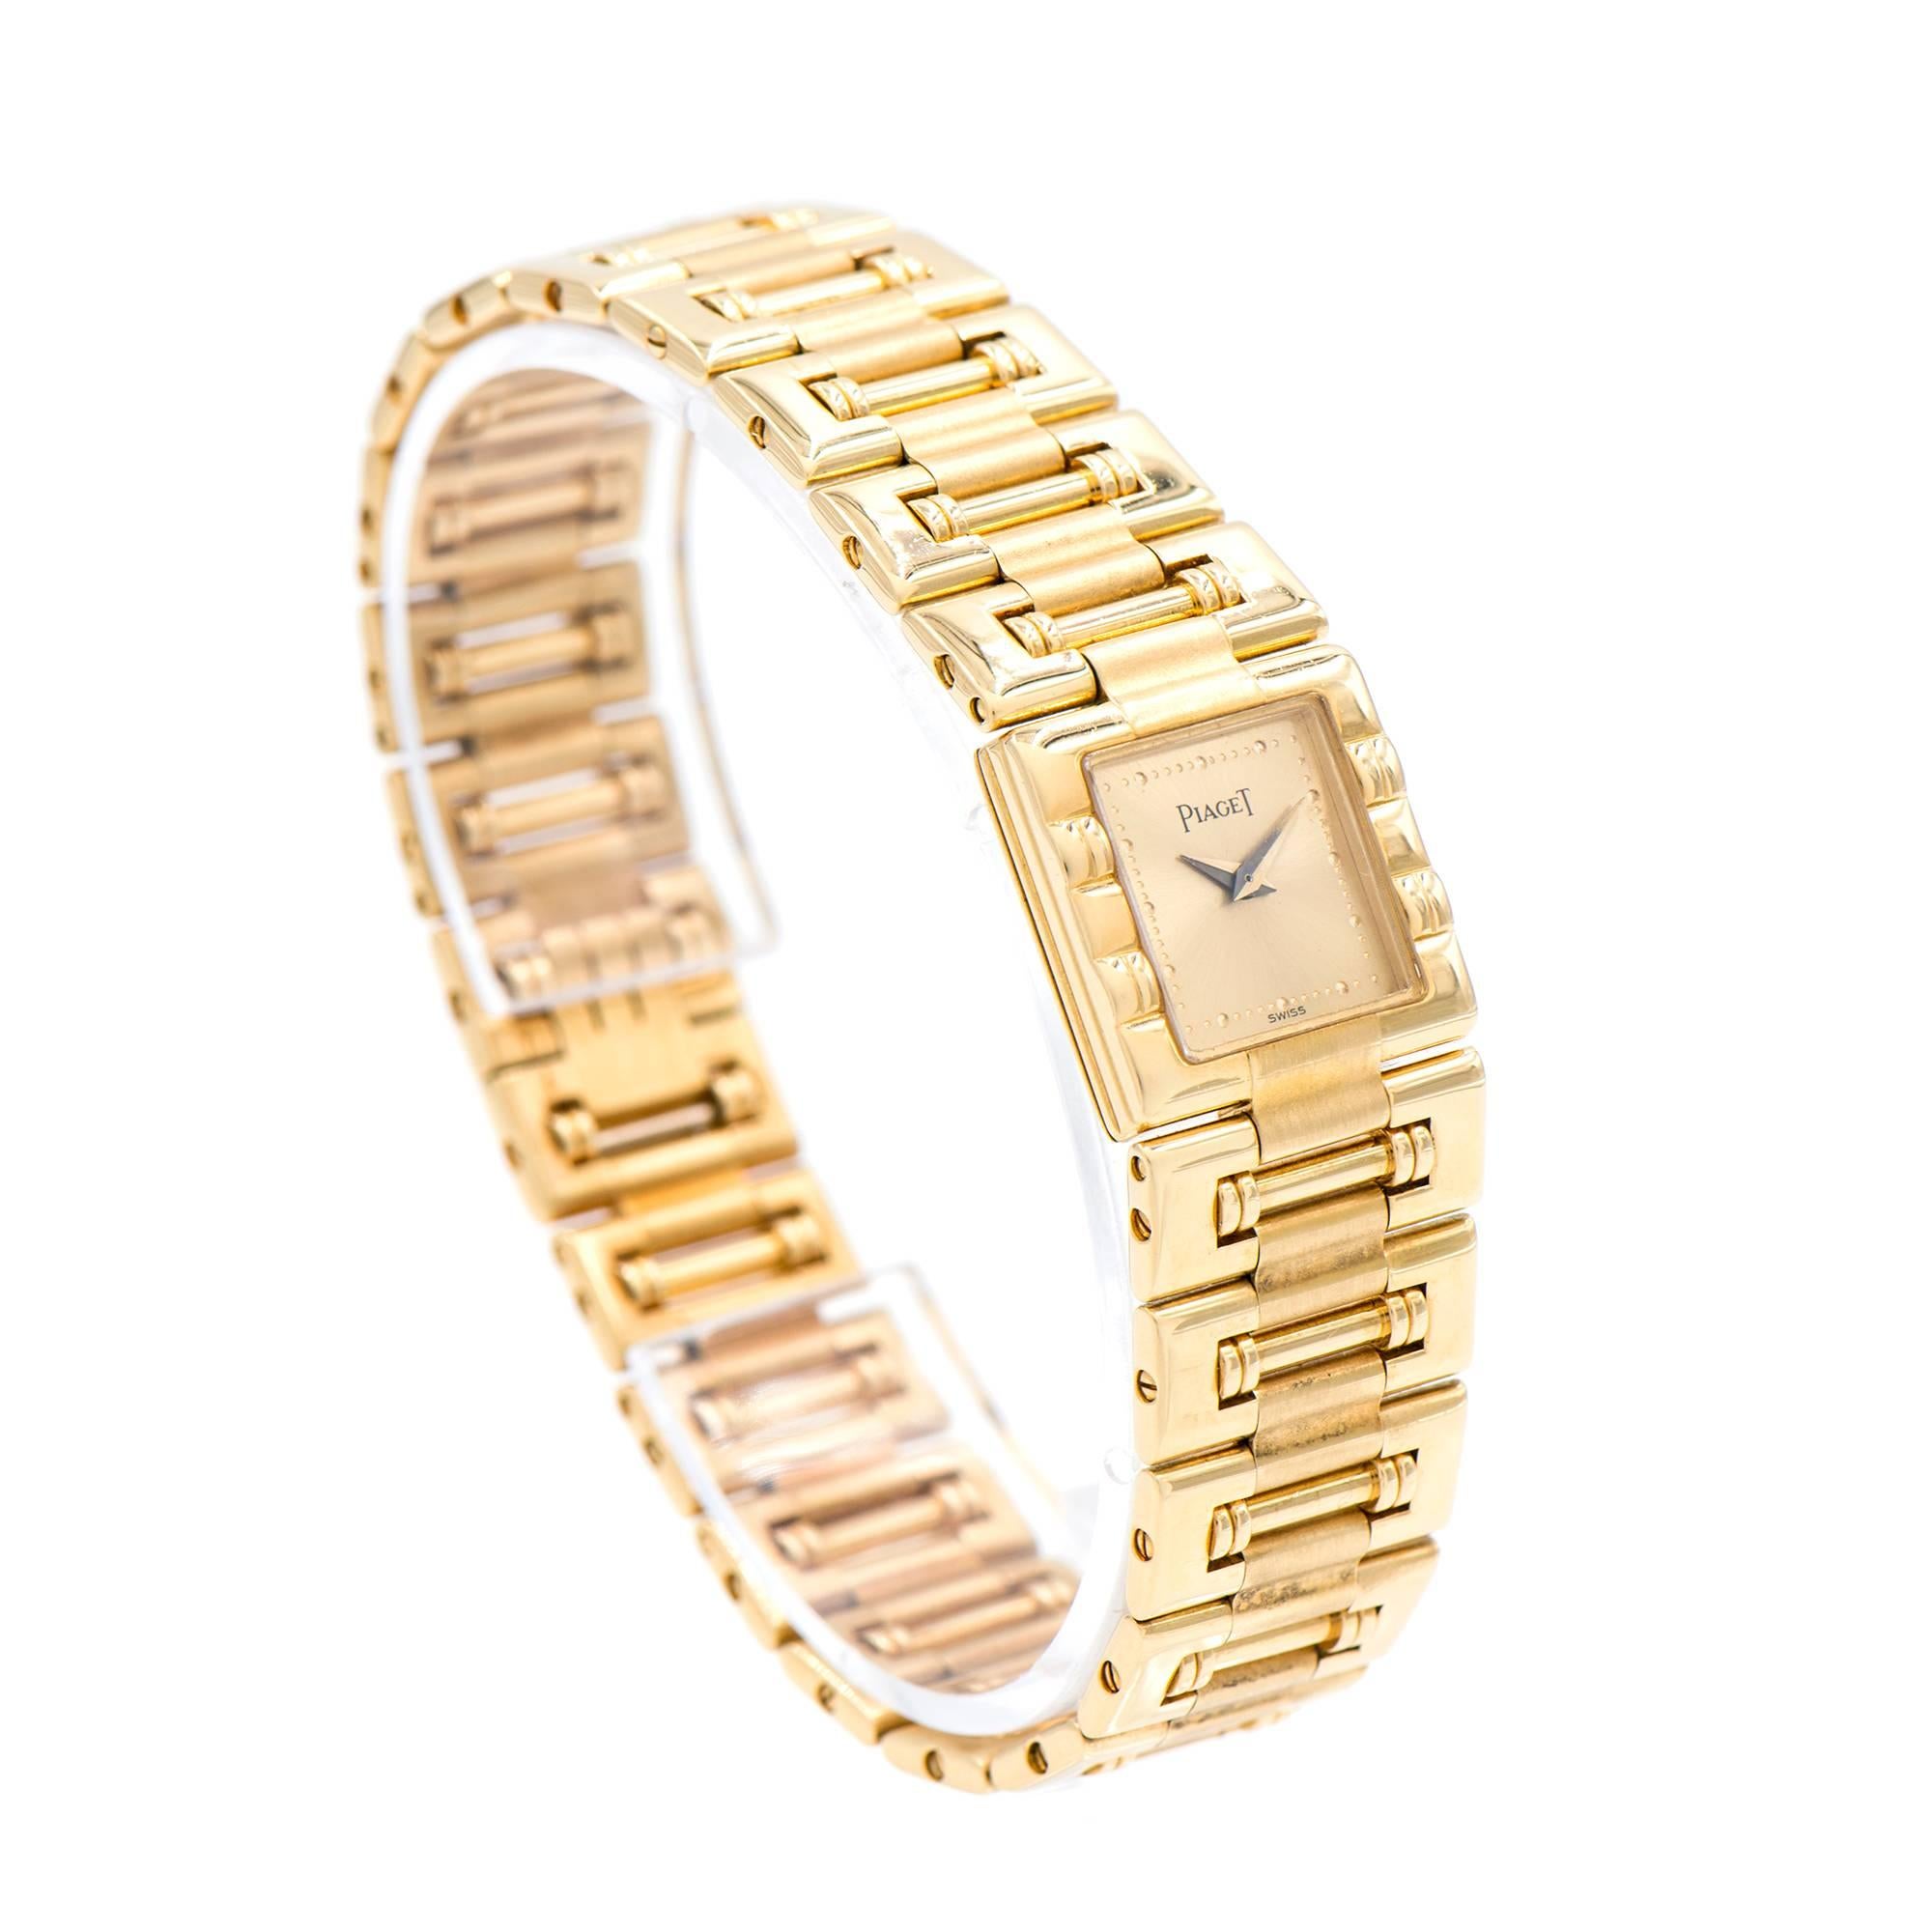 Beautiful sleek design 18k yellow gold ladies Piaget Dancer 15317 quartz with no crown showing push button back set.

Length: 7 inches – can be shortened 
Length: 17mm 
Width: 17mm 
Band width at case: 17mm 
Case thickness:5mm 
64.9 grams 
Crystal: